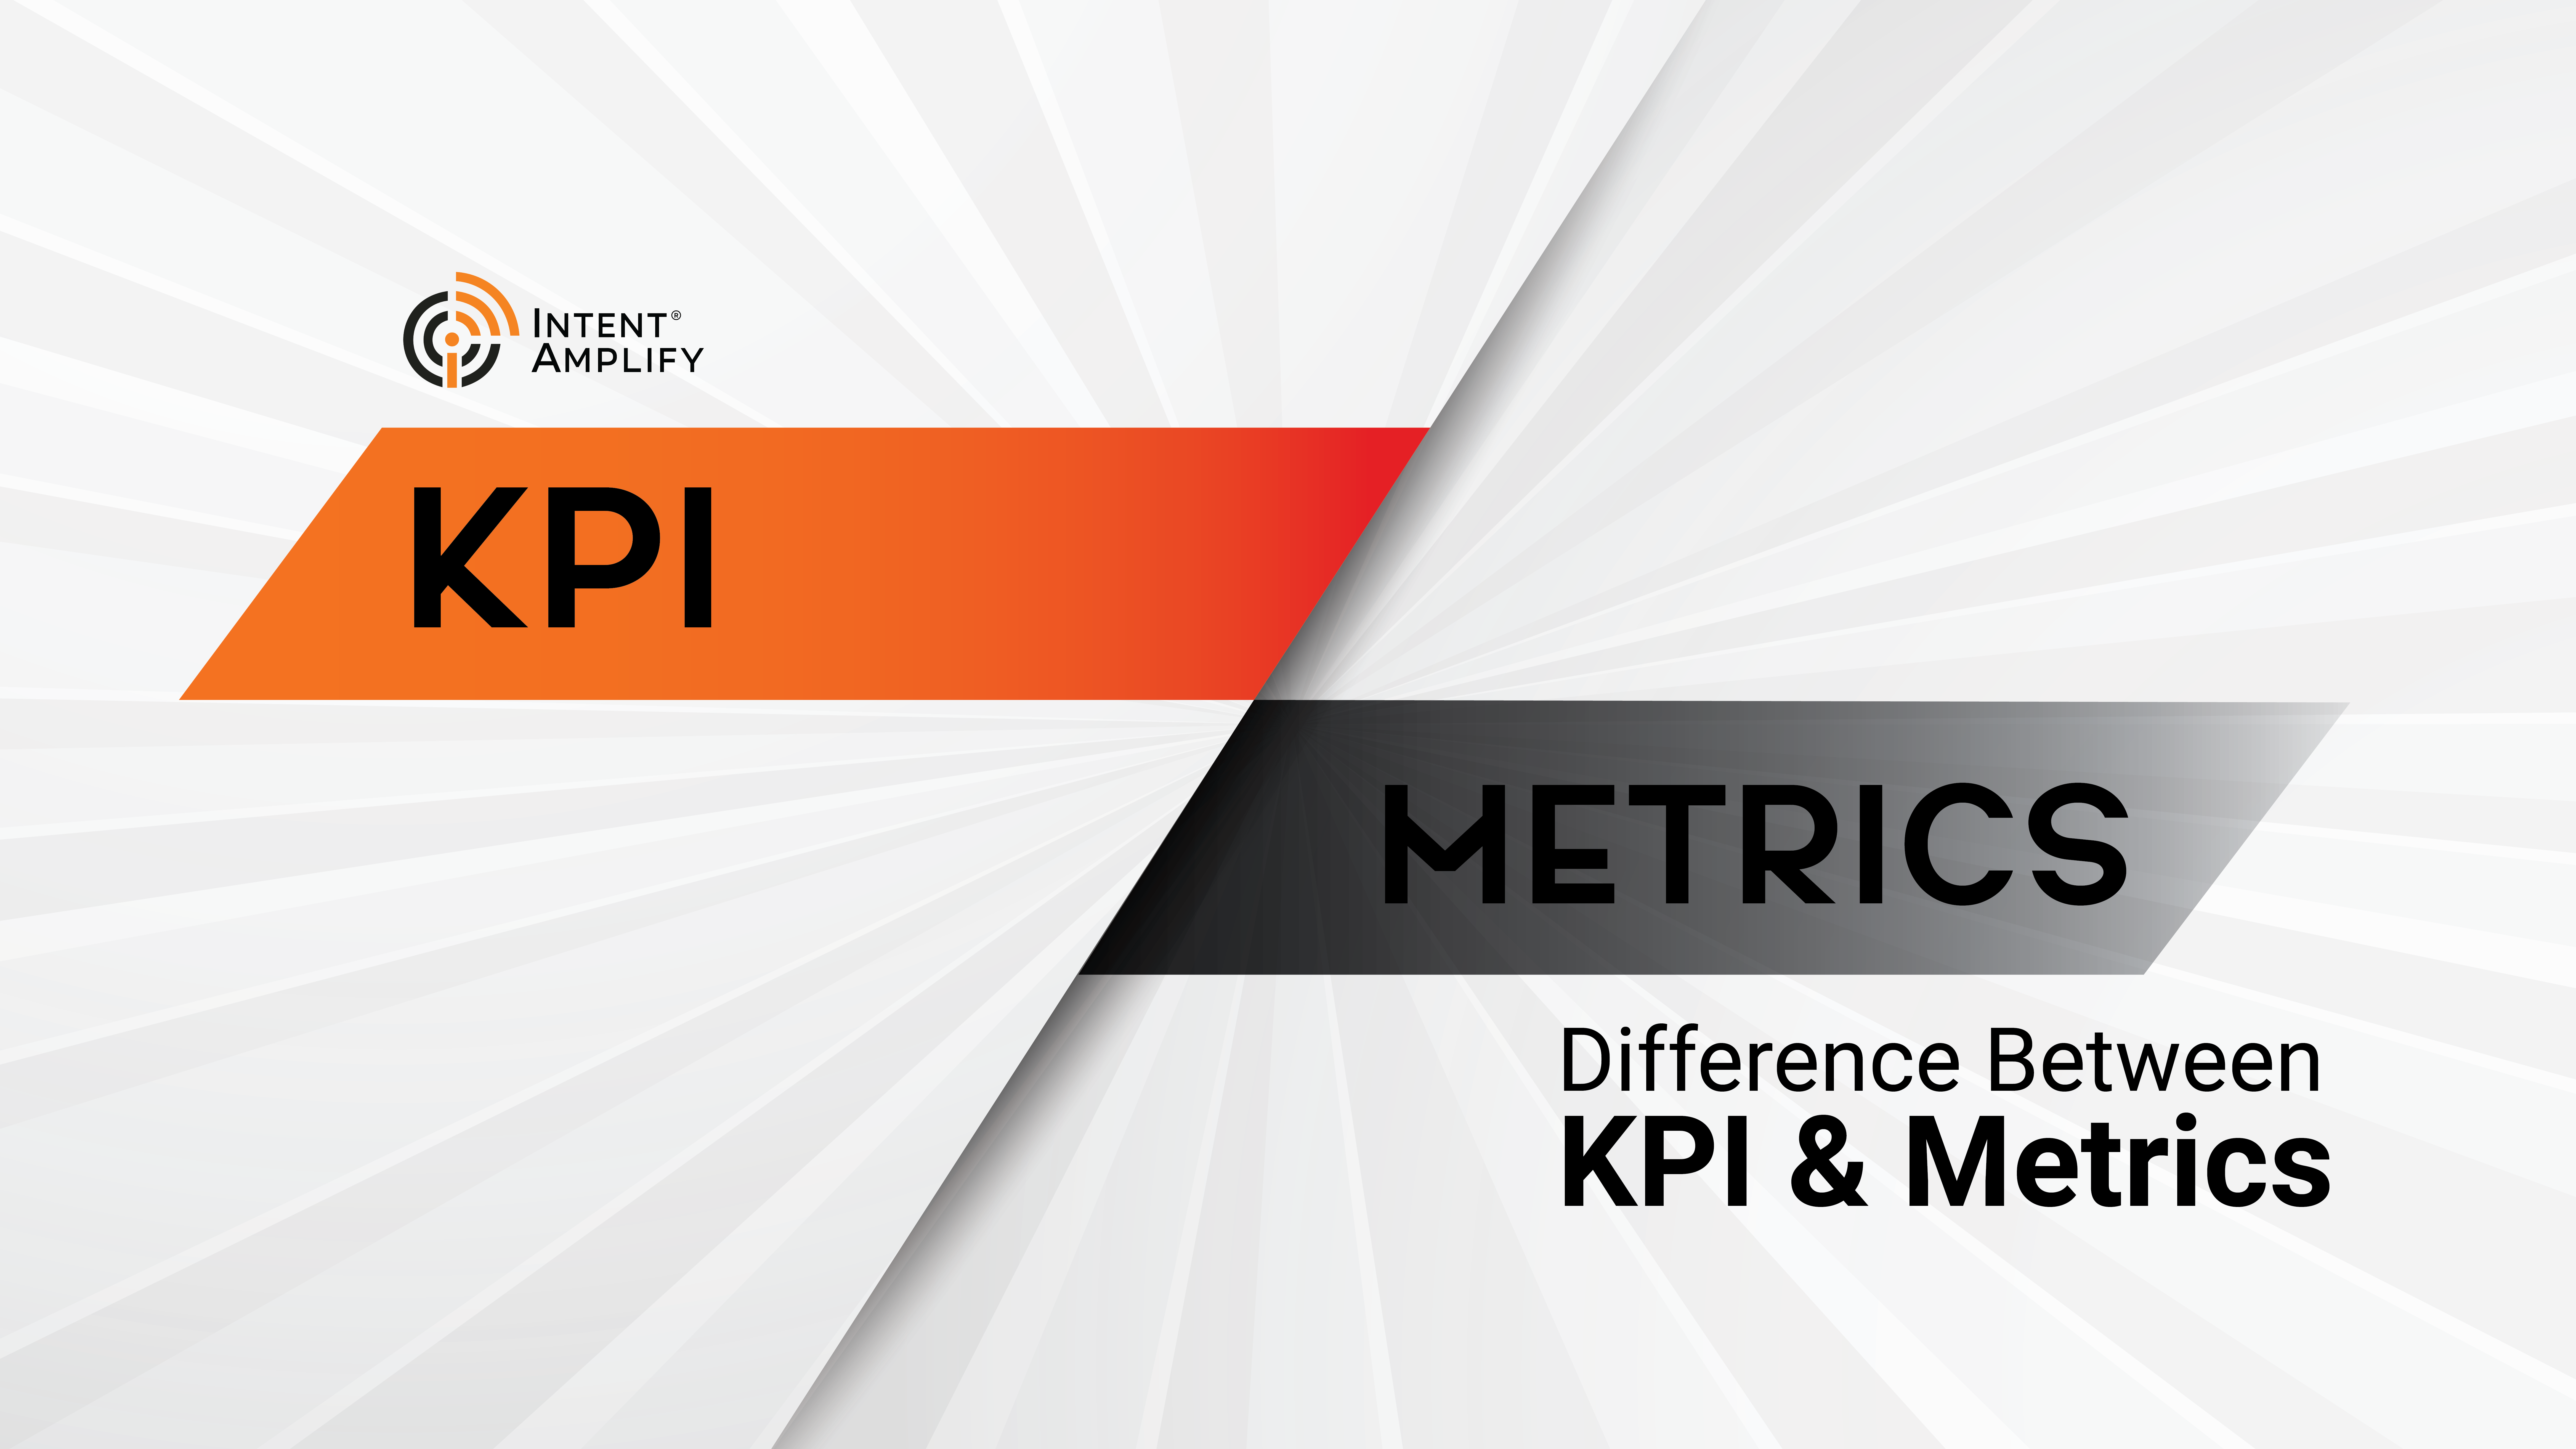 What is the difference between KPI & Metrics?